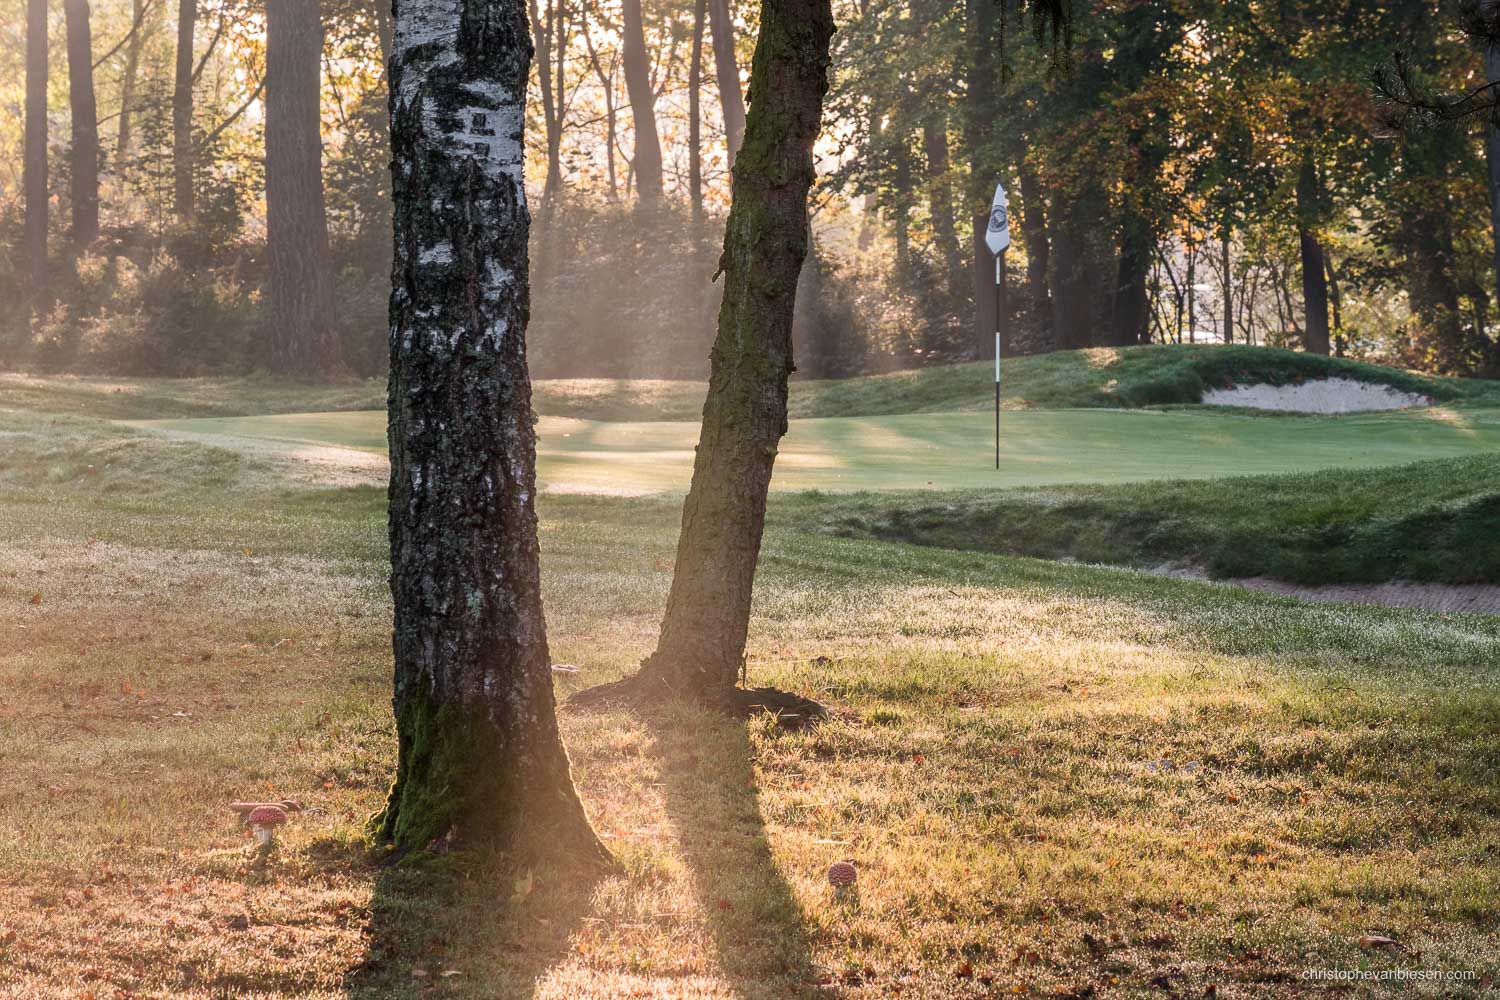 Work with me - Commission Work - Golf Club Grand Ducal Luxembourg Senningerberg - Hole 14 - Photography by Christophe Van Biesen - Luxembourg Landscape and Travel Photographer